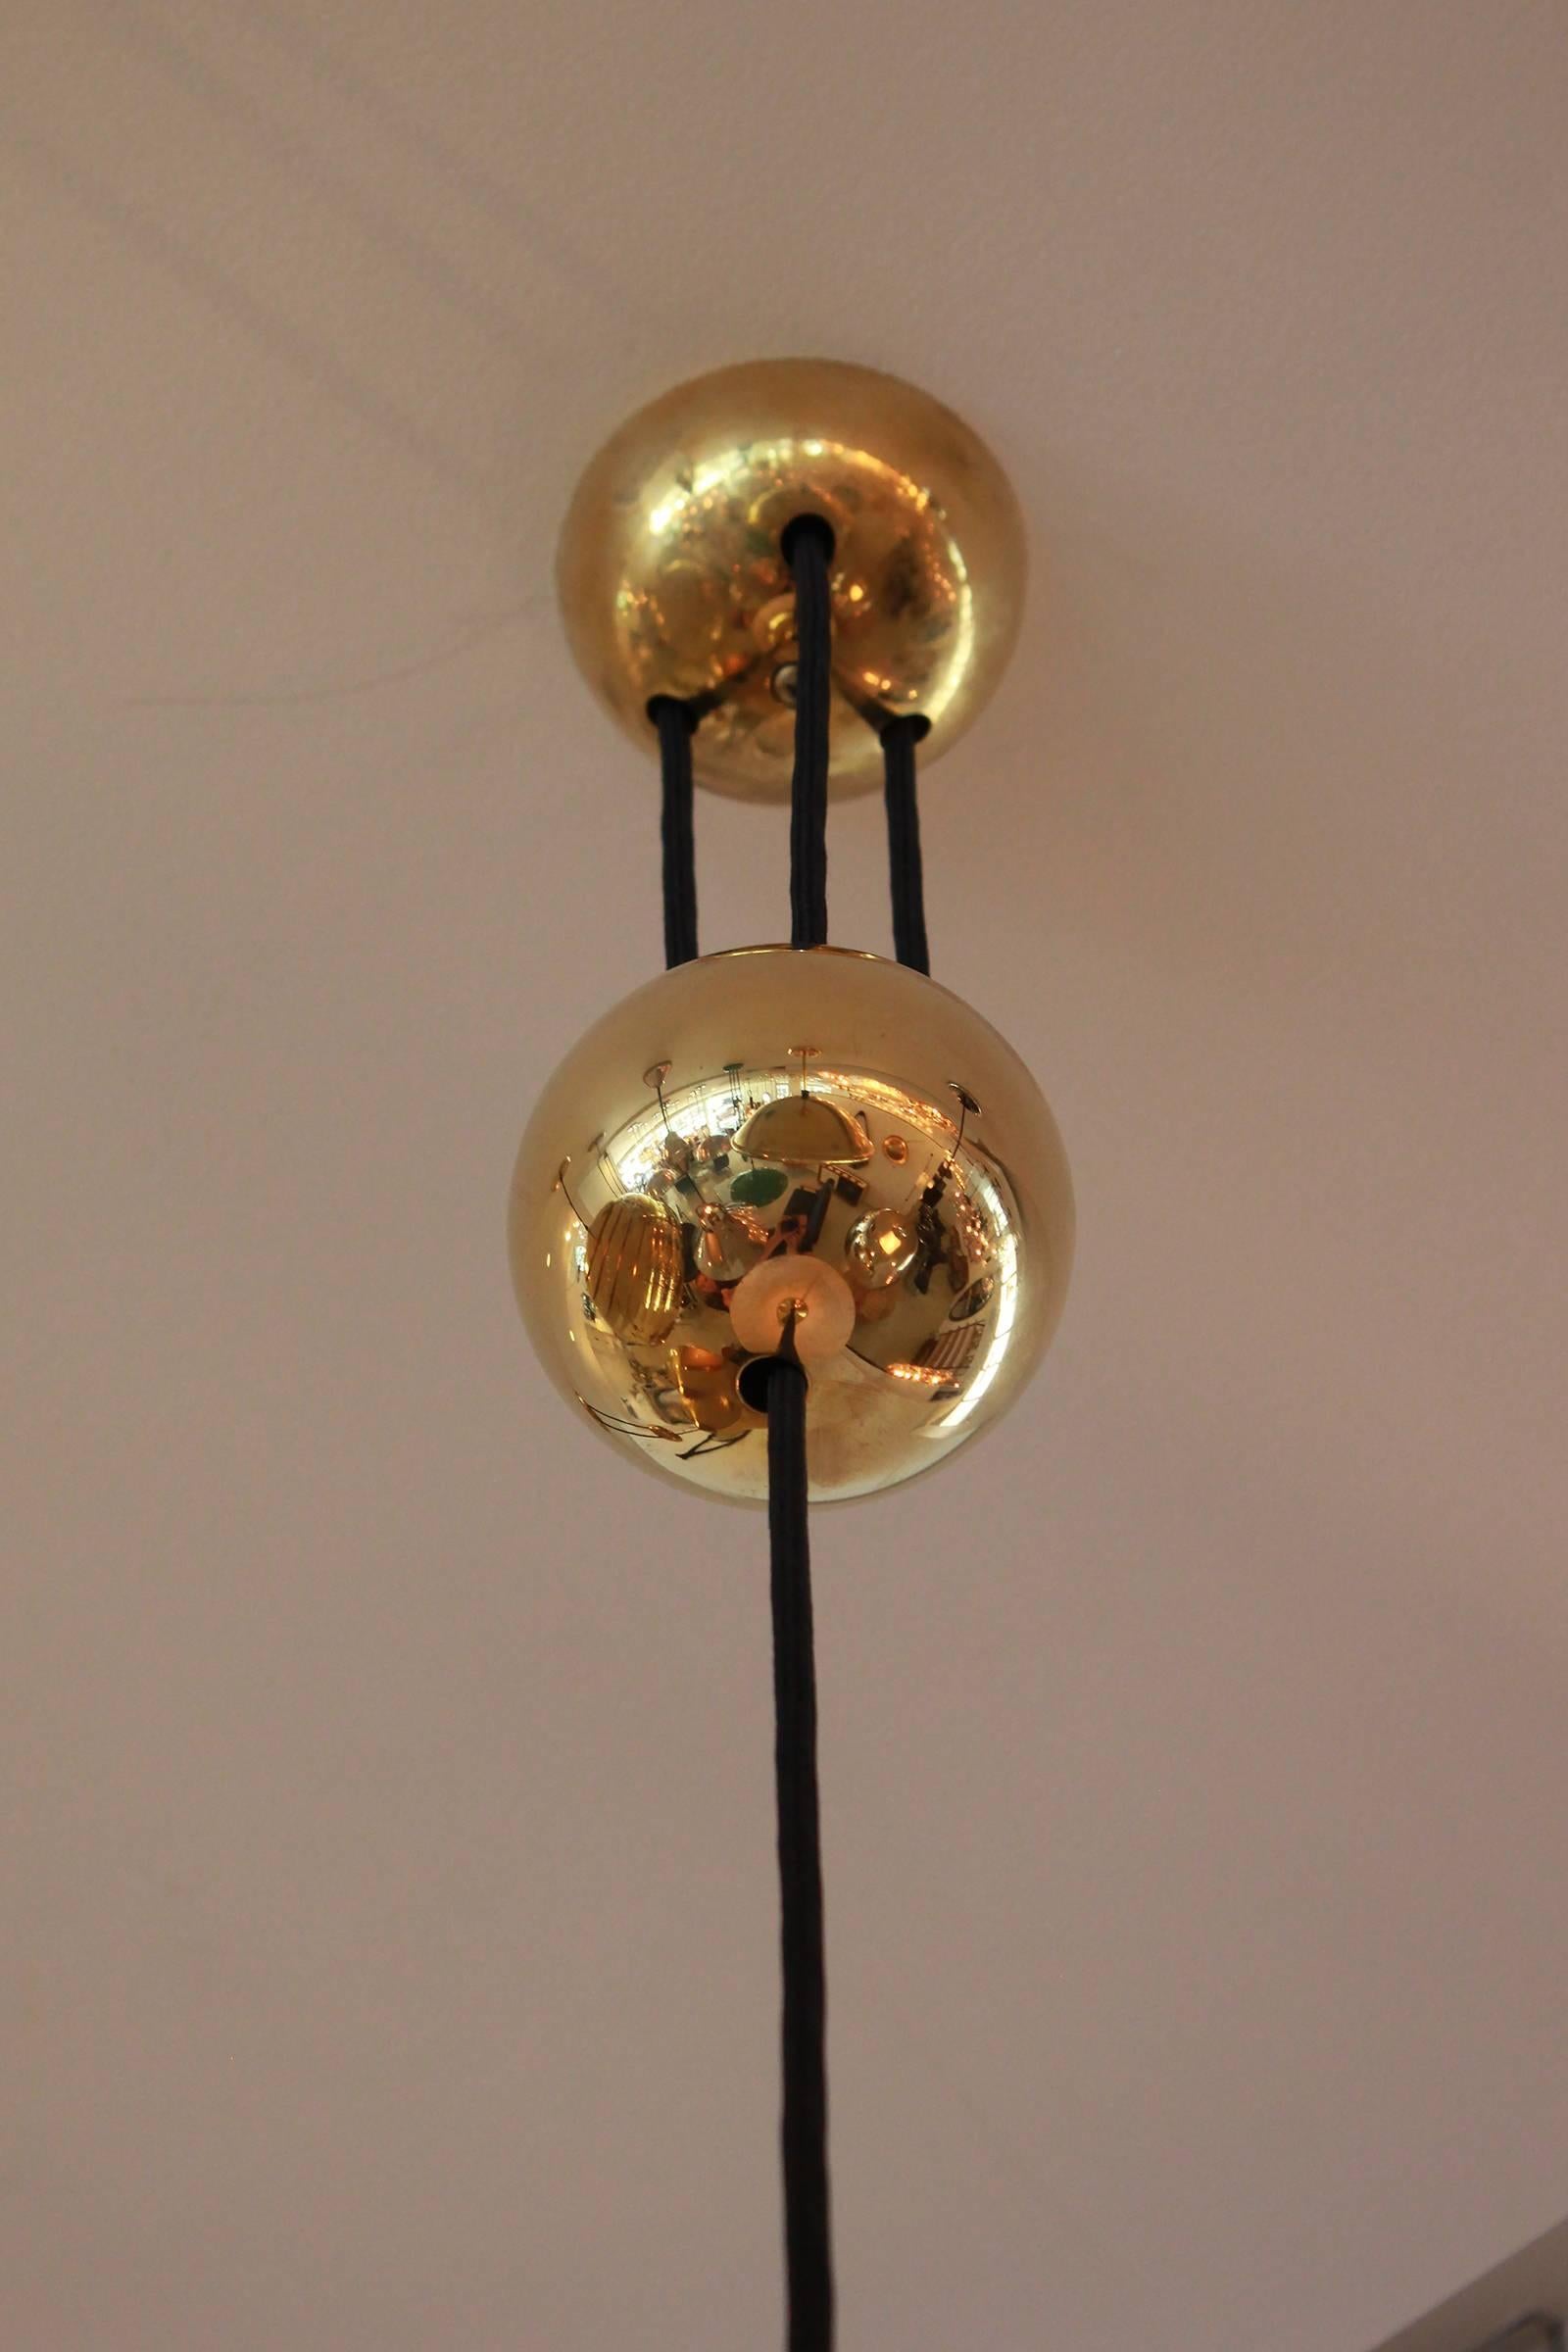 Pendant by Florian Schulz with shade and brass counter balance.